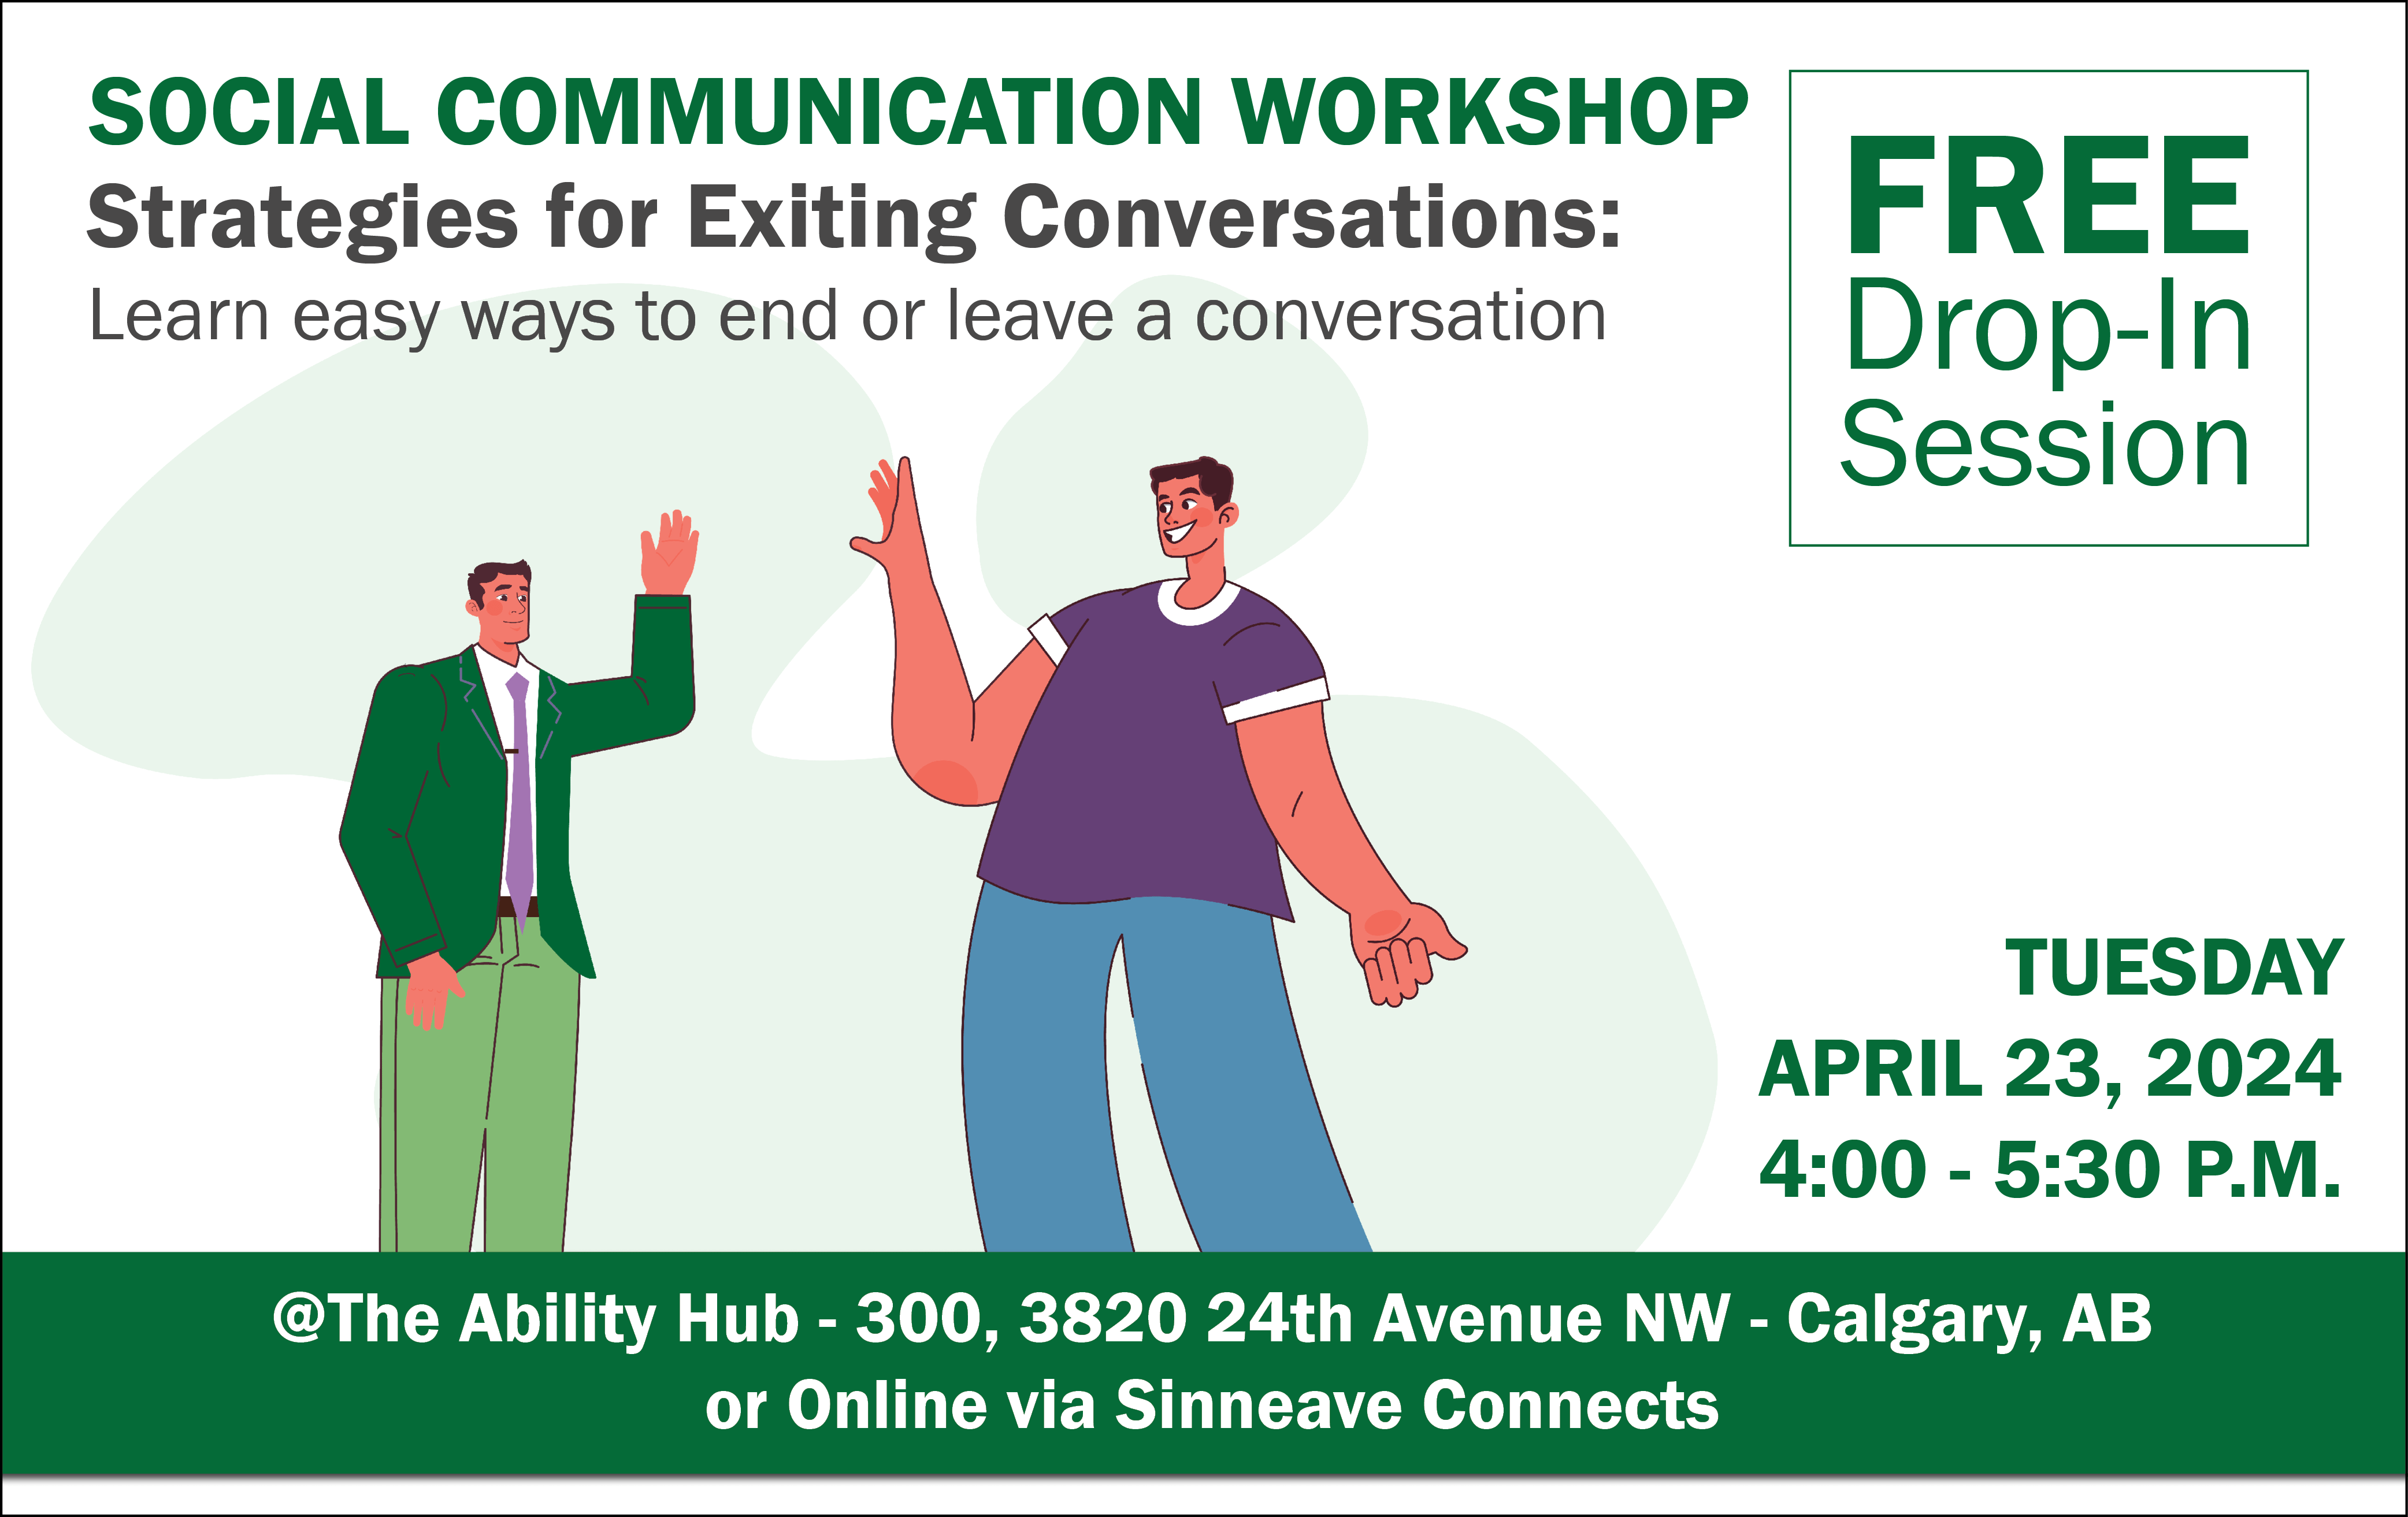 On a white background, in the top of the image reads, "Social Communication Workshop – Strategies for Exiting Conversations." On the right, the text says, "Free Drop-in Session. In the bottom right corner, the text reads, "Tuesday, April 23, 2024 from 4 to 5:30 pm. The text at the bottom reads, "@The Ability Hub or online via Sinneave Connects."